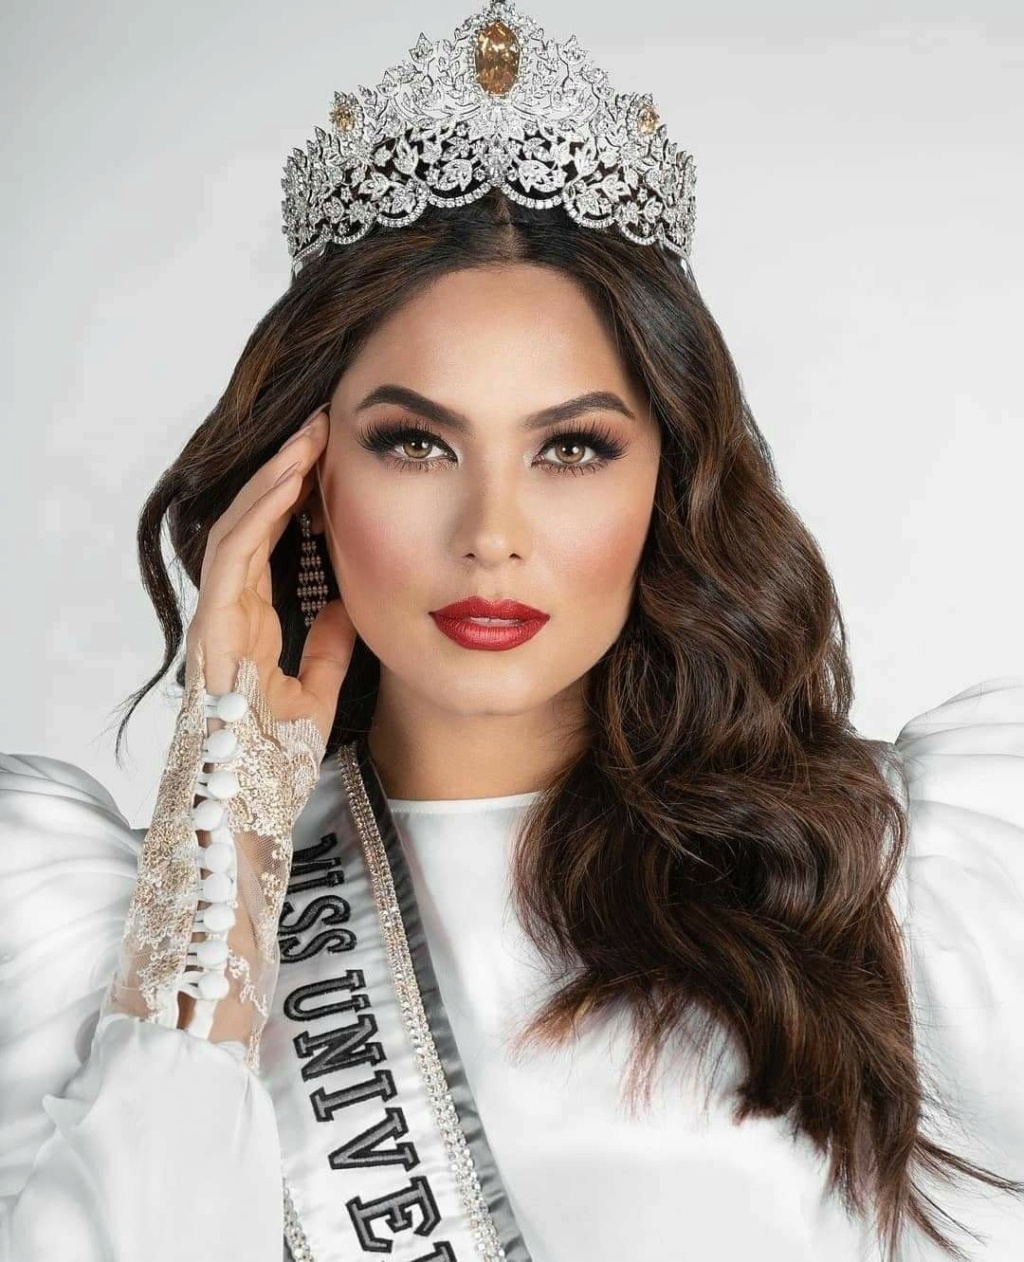 The Official Thread Of Miss Universe 2020 - Andrea Meza of Mexico  - Page 4 23803710